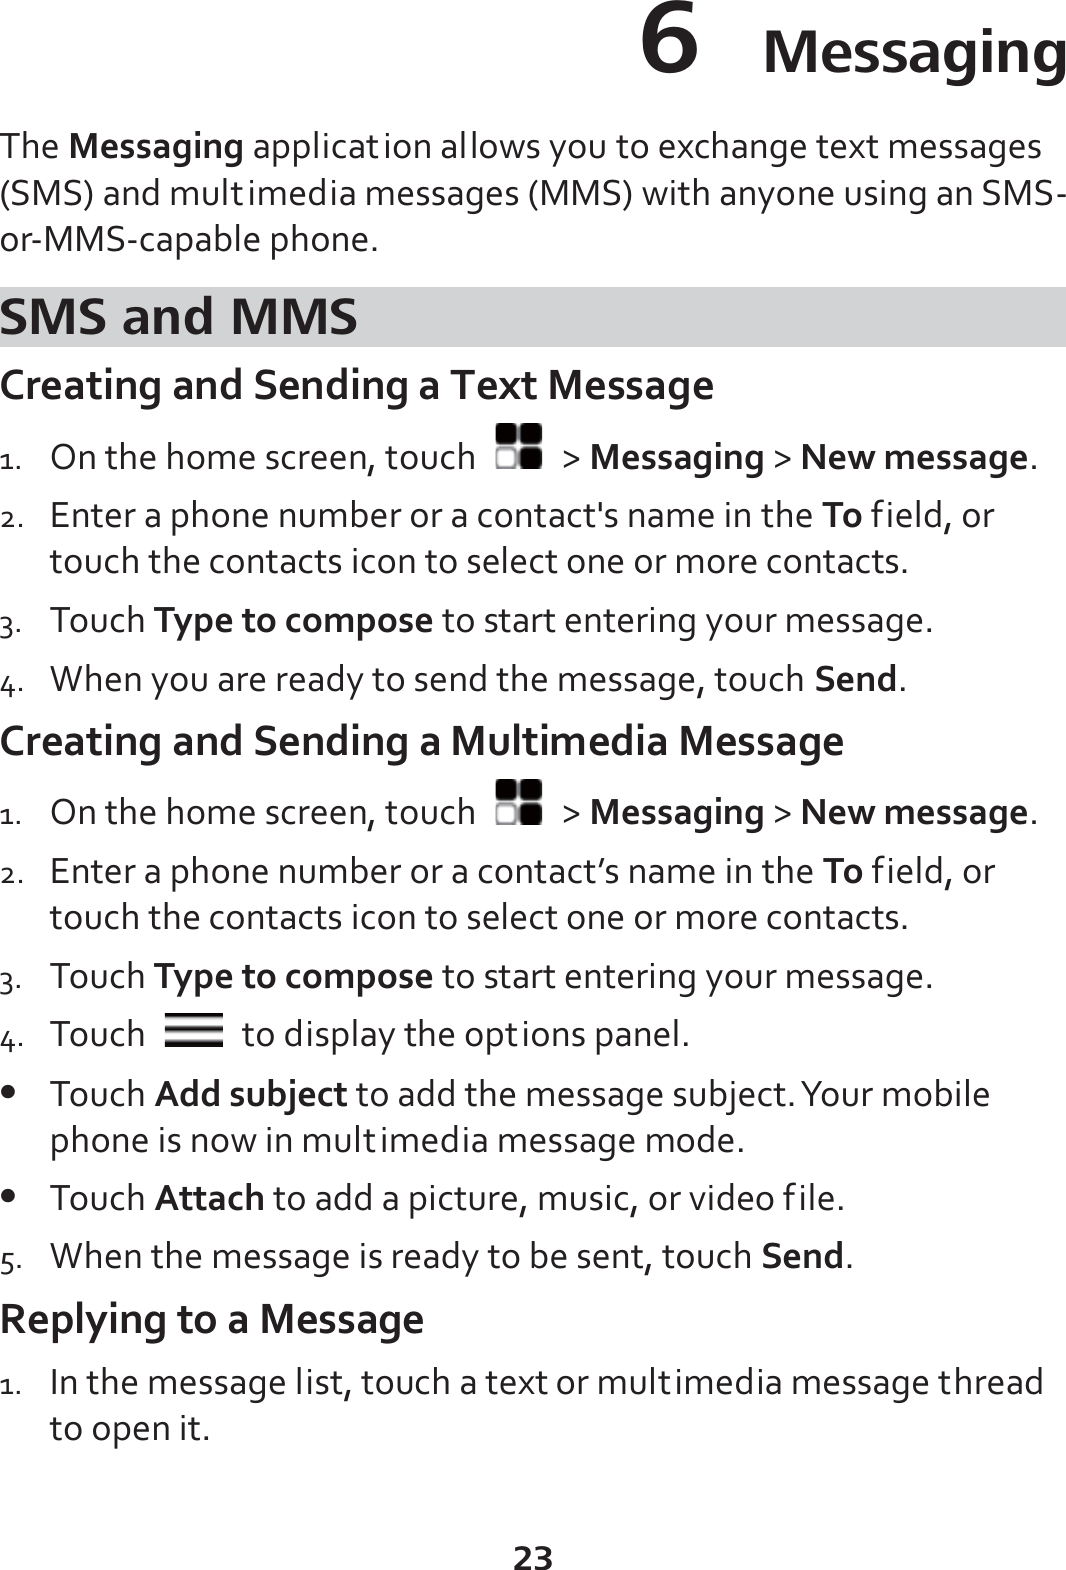 23 6  Messaging The Messaging application allows you to exchange text messages (SMS) and multimedia messages (MMS) with anyone using an SMS-or-MMS-capable phone. SMS and MMS Creating and Sending a Text Message 1. On the home screen, touch   &gt; Messaging &gt; New message. 2. Enter a phone number or a contact&apos;s name in the To field, or touch the contacts icon to select one or more contacts. 3. Touch Type to compose to start entering your message. 4. When you are ready to send the message, touch Send. Creating and Sending a Multimedia Message 1. On the home screen, touch   &gt; Messaging &gt; New message. 2. Enter a phone number or a contact’s name in the To field, or touch the contacts icon to select one or more contacts. 3. Touch Type to compose to start entering your message. 4. Touch    to display the options panel.   z Touch Add subject to add the message subject. Your mobile phone is now in multimedia message mode. z Touch Attach to add a picture, music, or video file. 5. When the message is ready to be sent, touch Send. Replying to a Message 1. In the message list, touch a text or multimedia message thread to open it. 